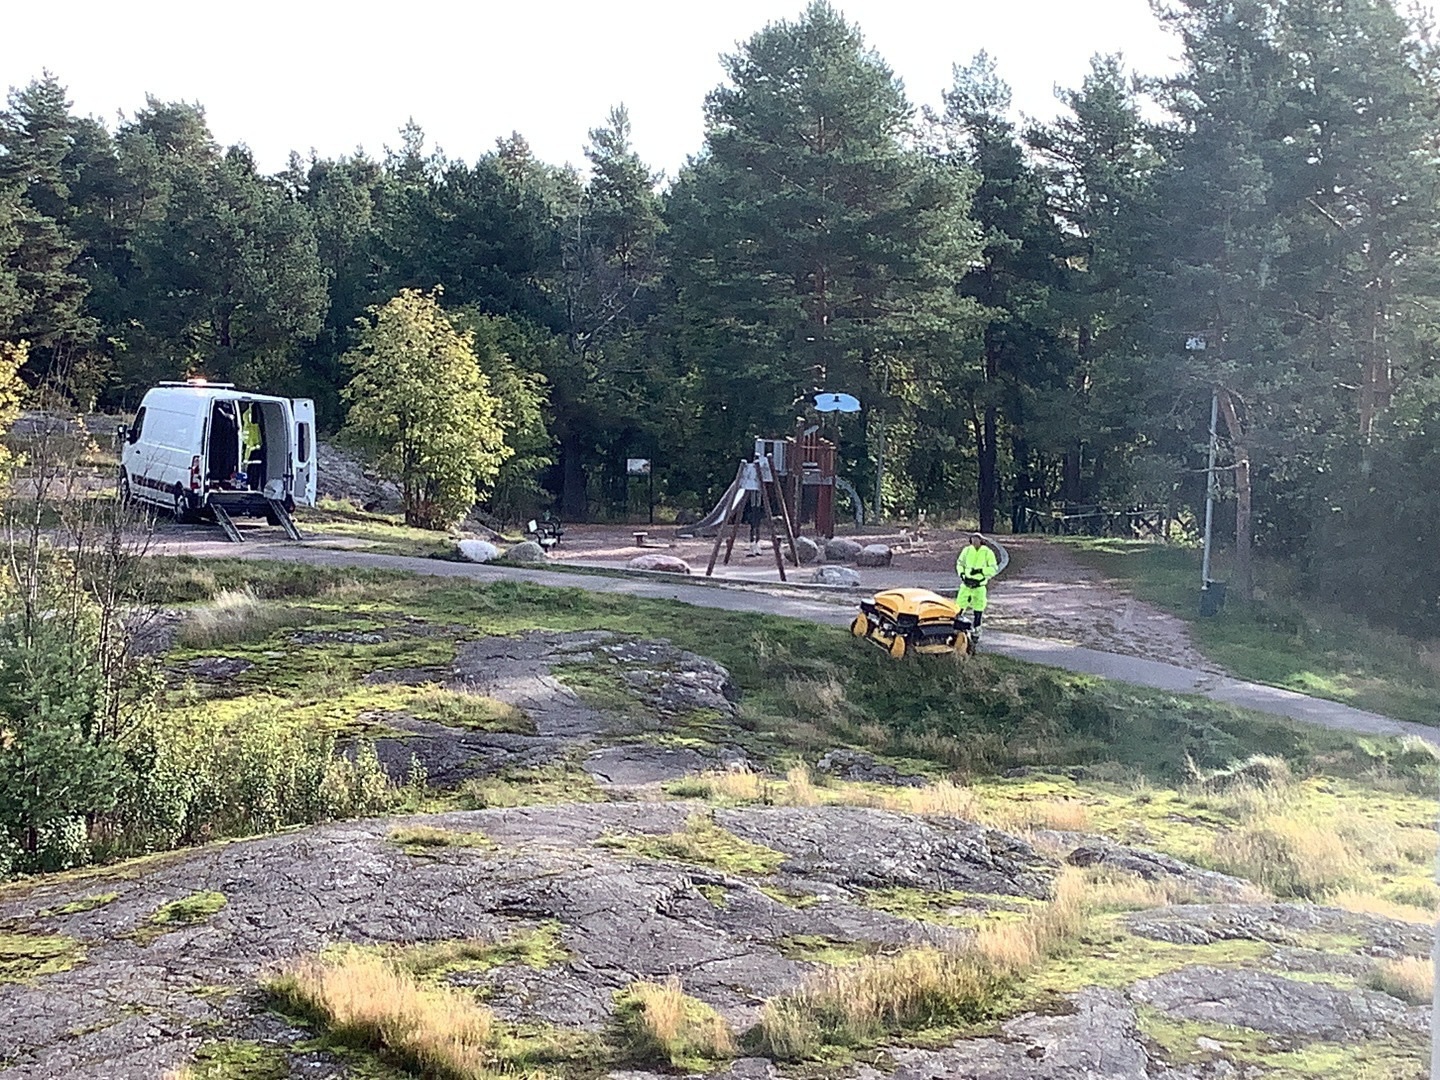 A park, with playground, rocks, a van and a robot lawn mower